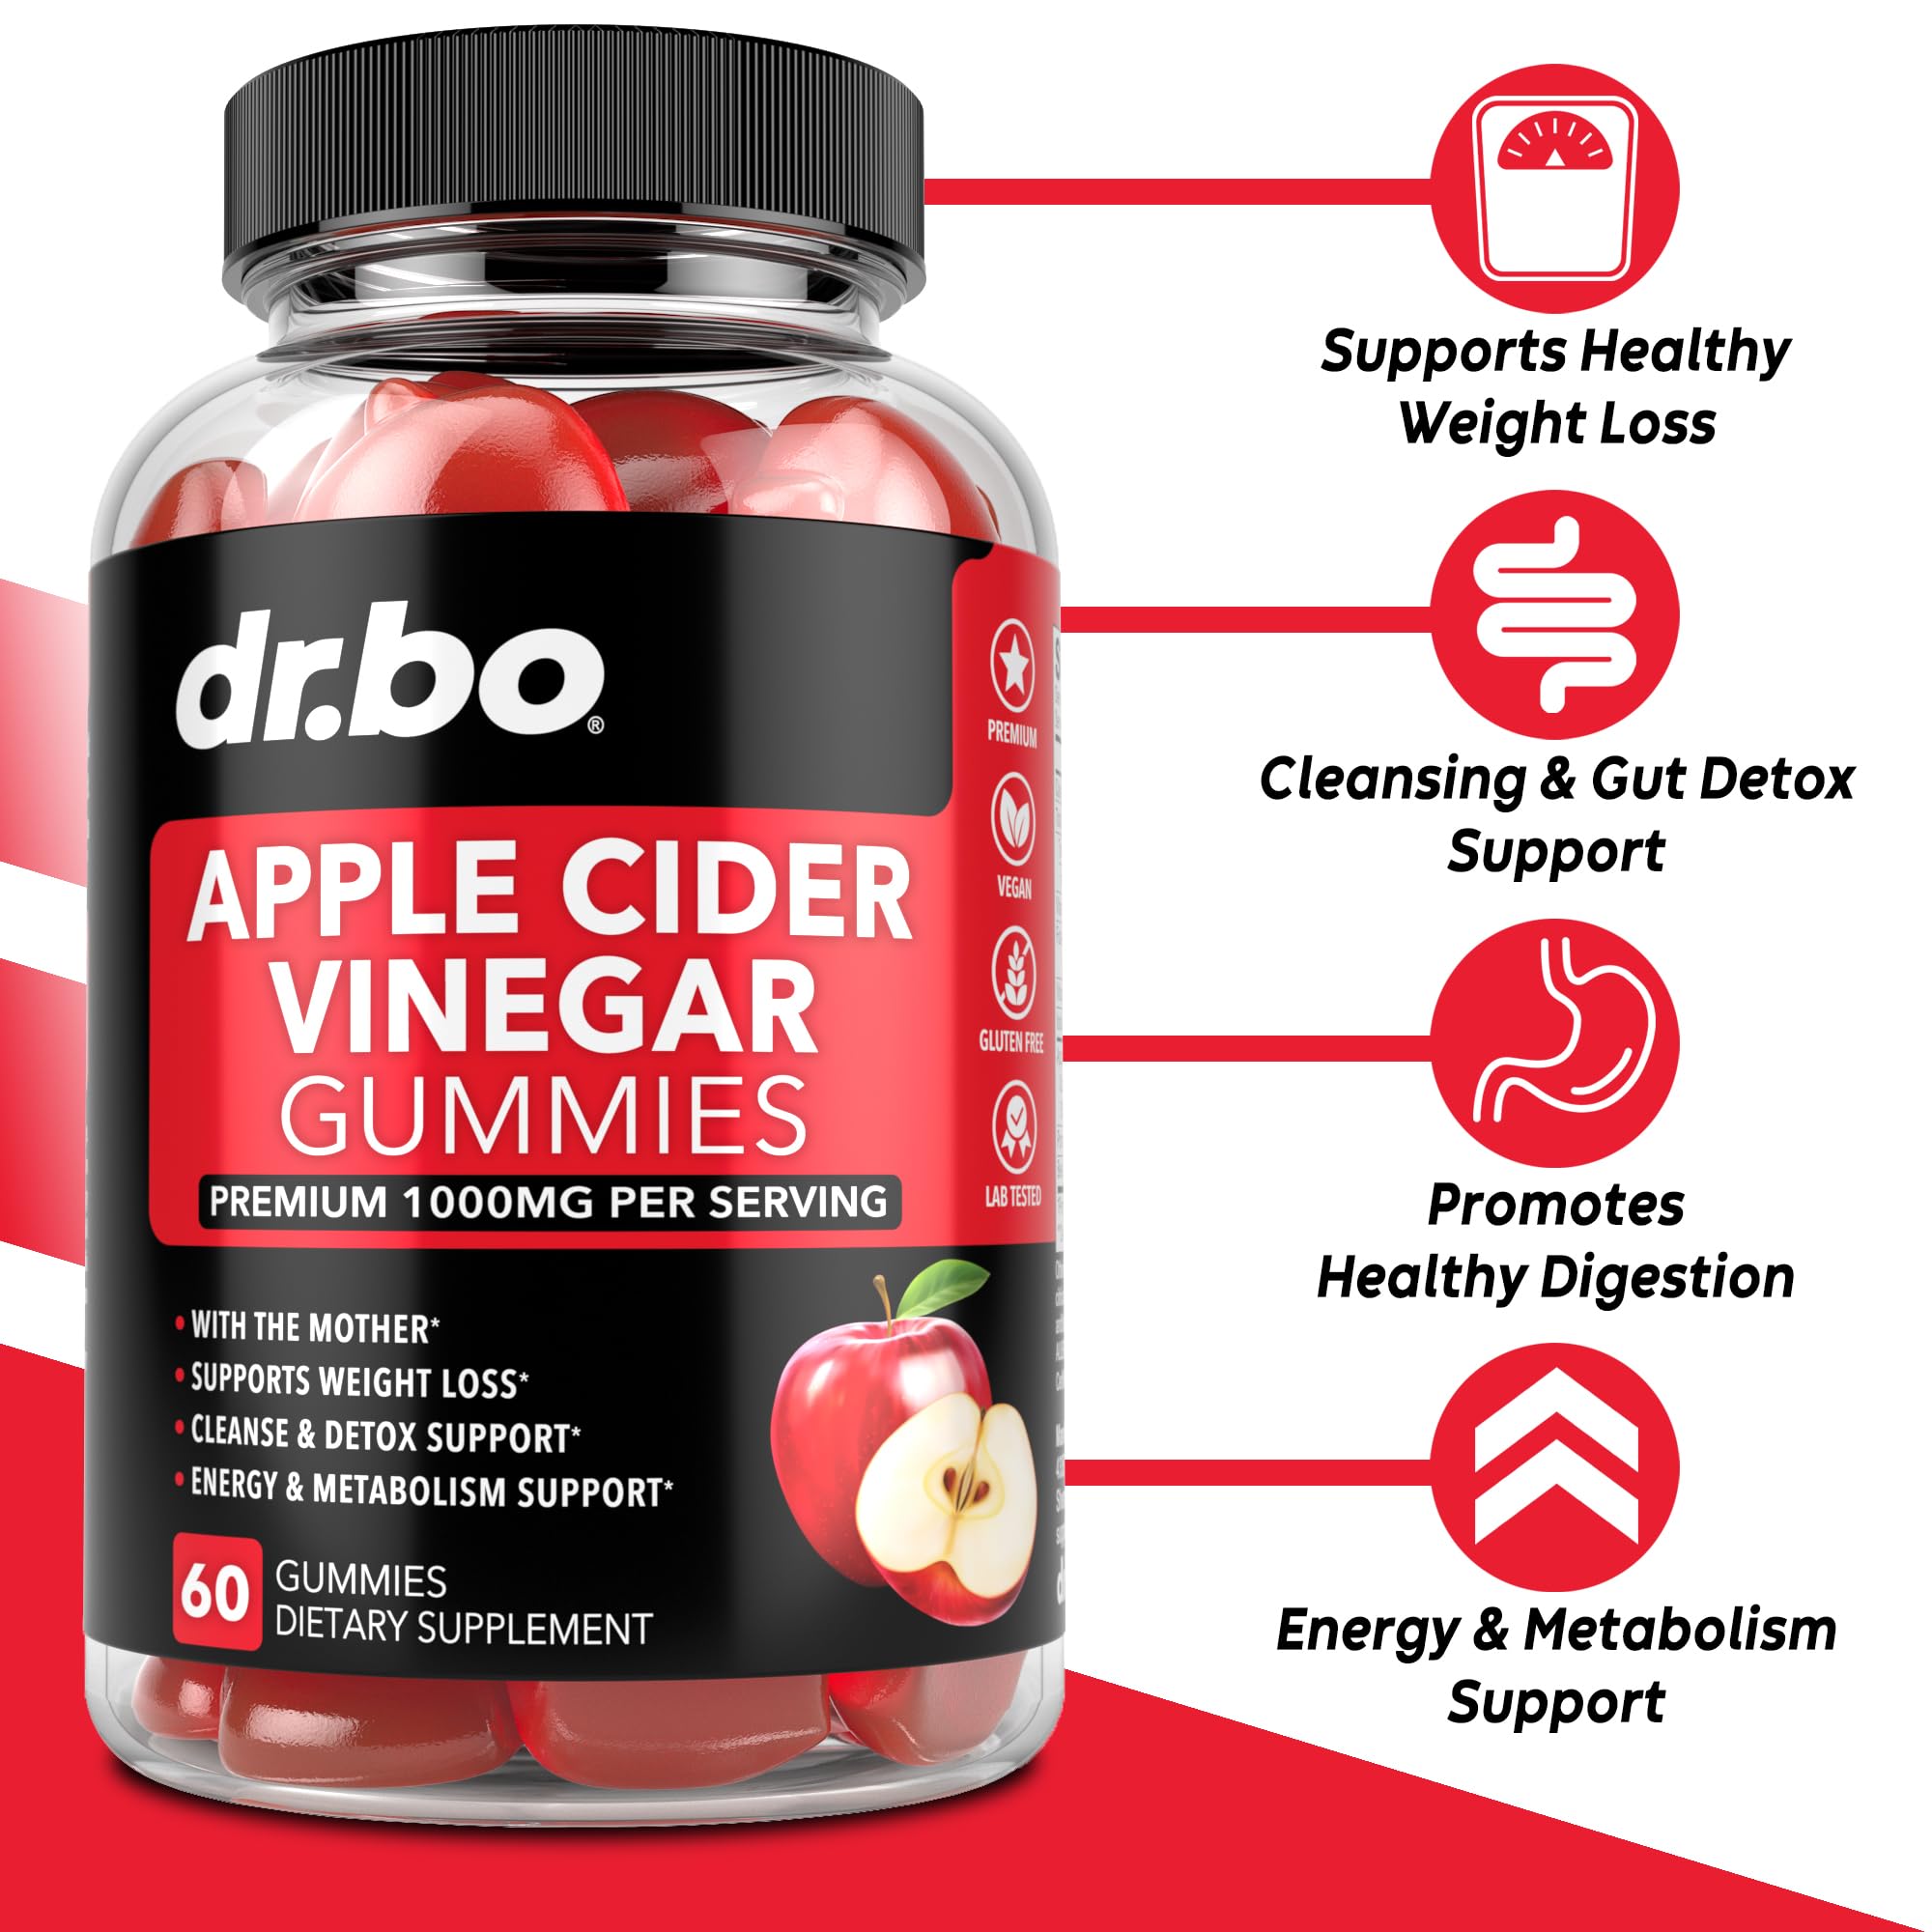 ACV Apple Cider Vinegar Gummies - Natural Support for Advanced Weight Loss, Detox, Cleansing, Digestion & Gut Health - ACV Gummies Supplements with 1000MG Apple Cider Vinegar Gummies with The Mother